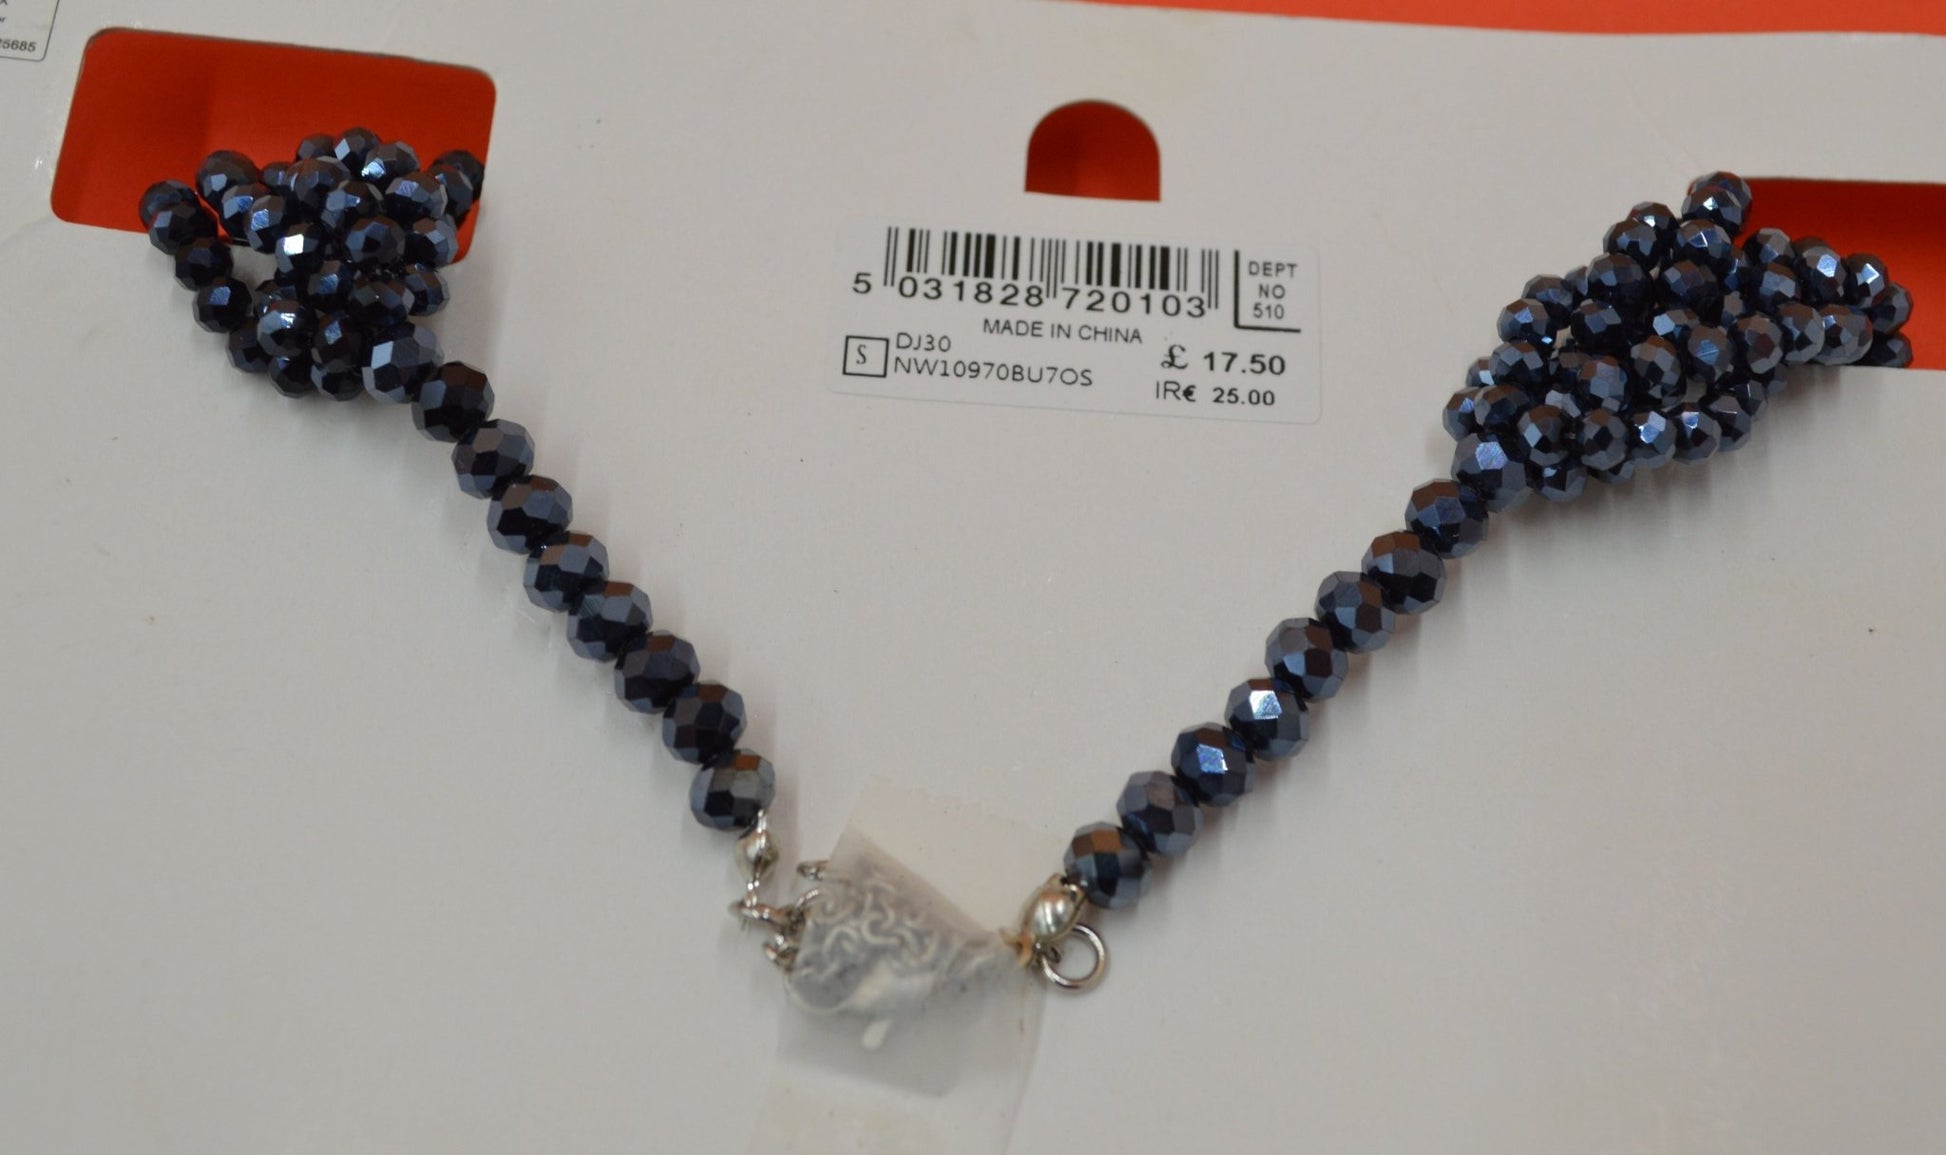 DOROTHY PERKINS TWISTED BEADS NECKLACE VERY DARK BLUE - TMD167207